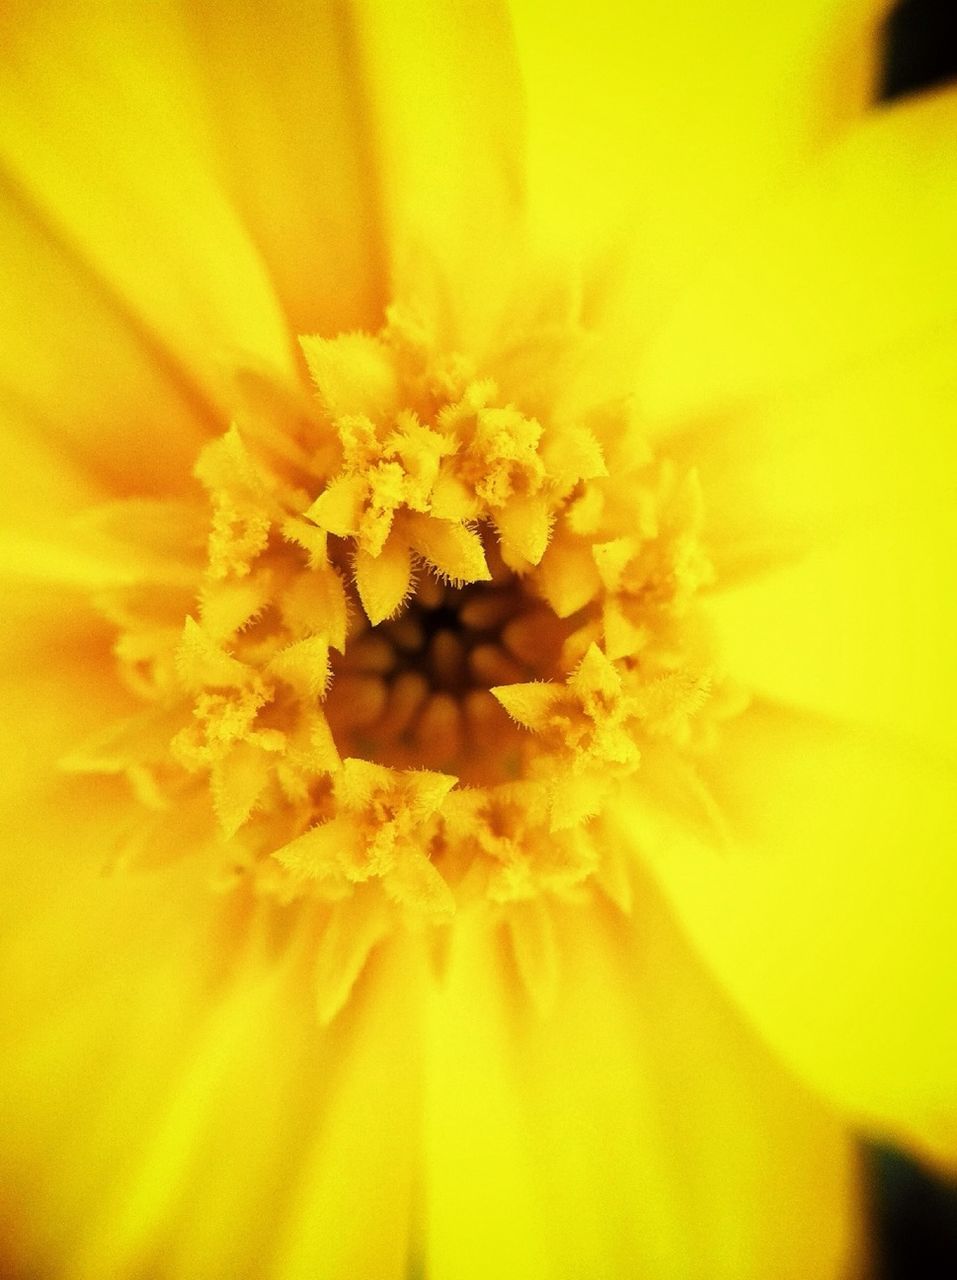 flower, petal, flower head, yellow, freshness, fragility, single flower, extreme close-up, close-up, beauty in nature, pollen, macro, full frame, backgrounds, selective focus, nature, growth, stamen, in bloom, detail